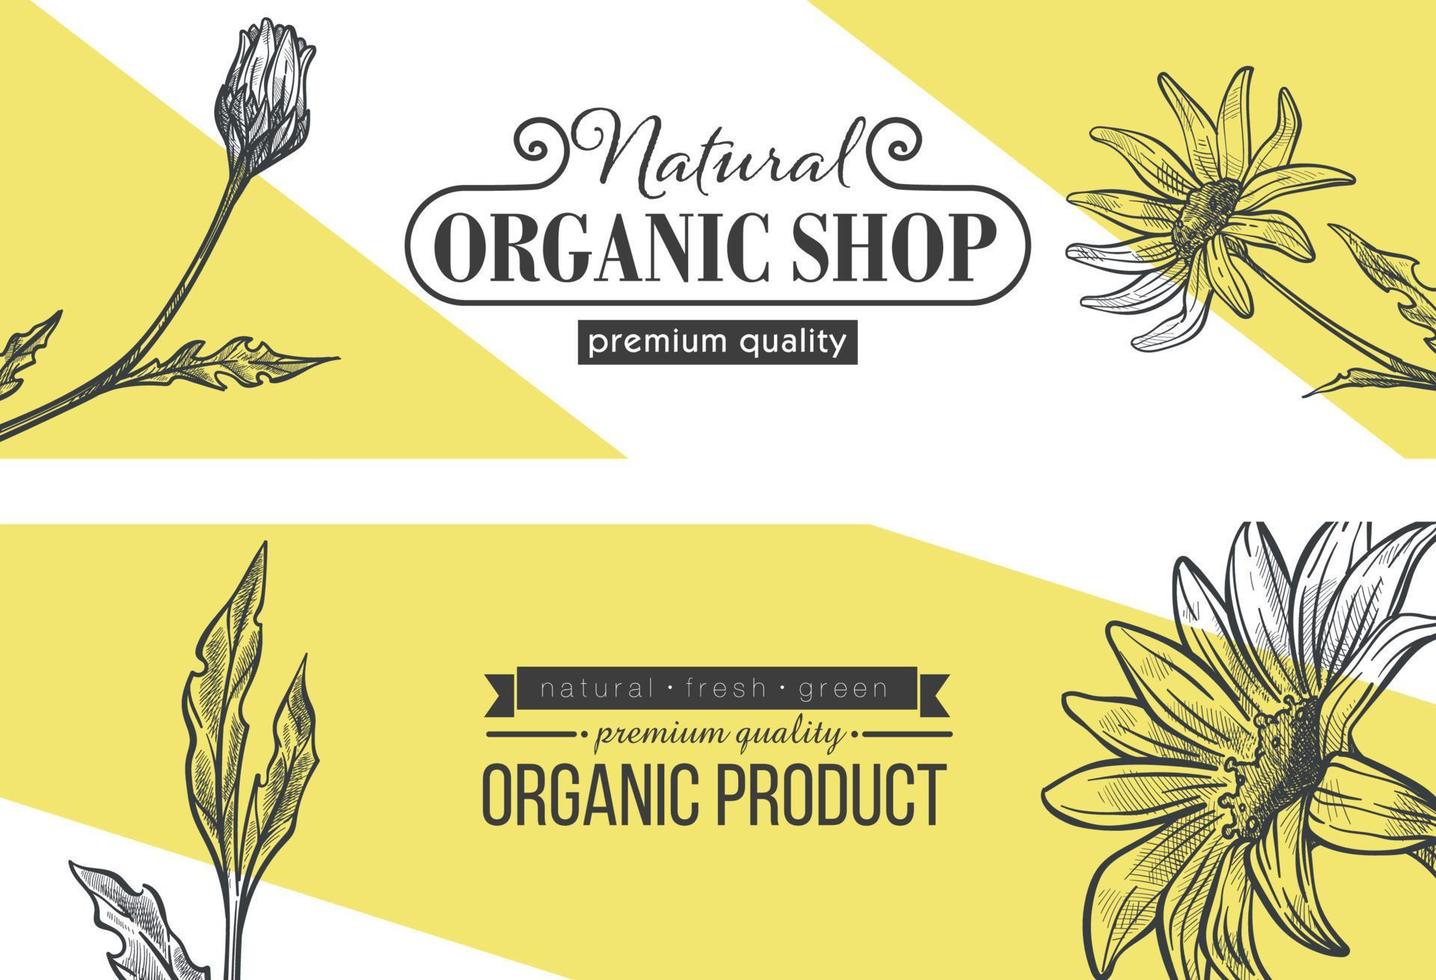 Organic shop advertisement banners, store ads vector